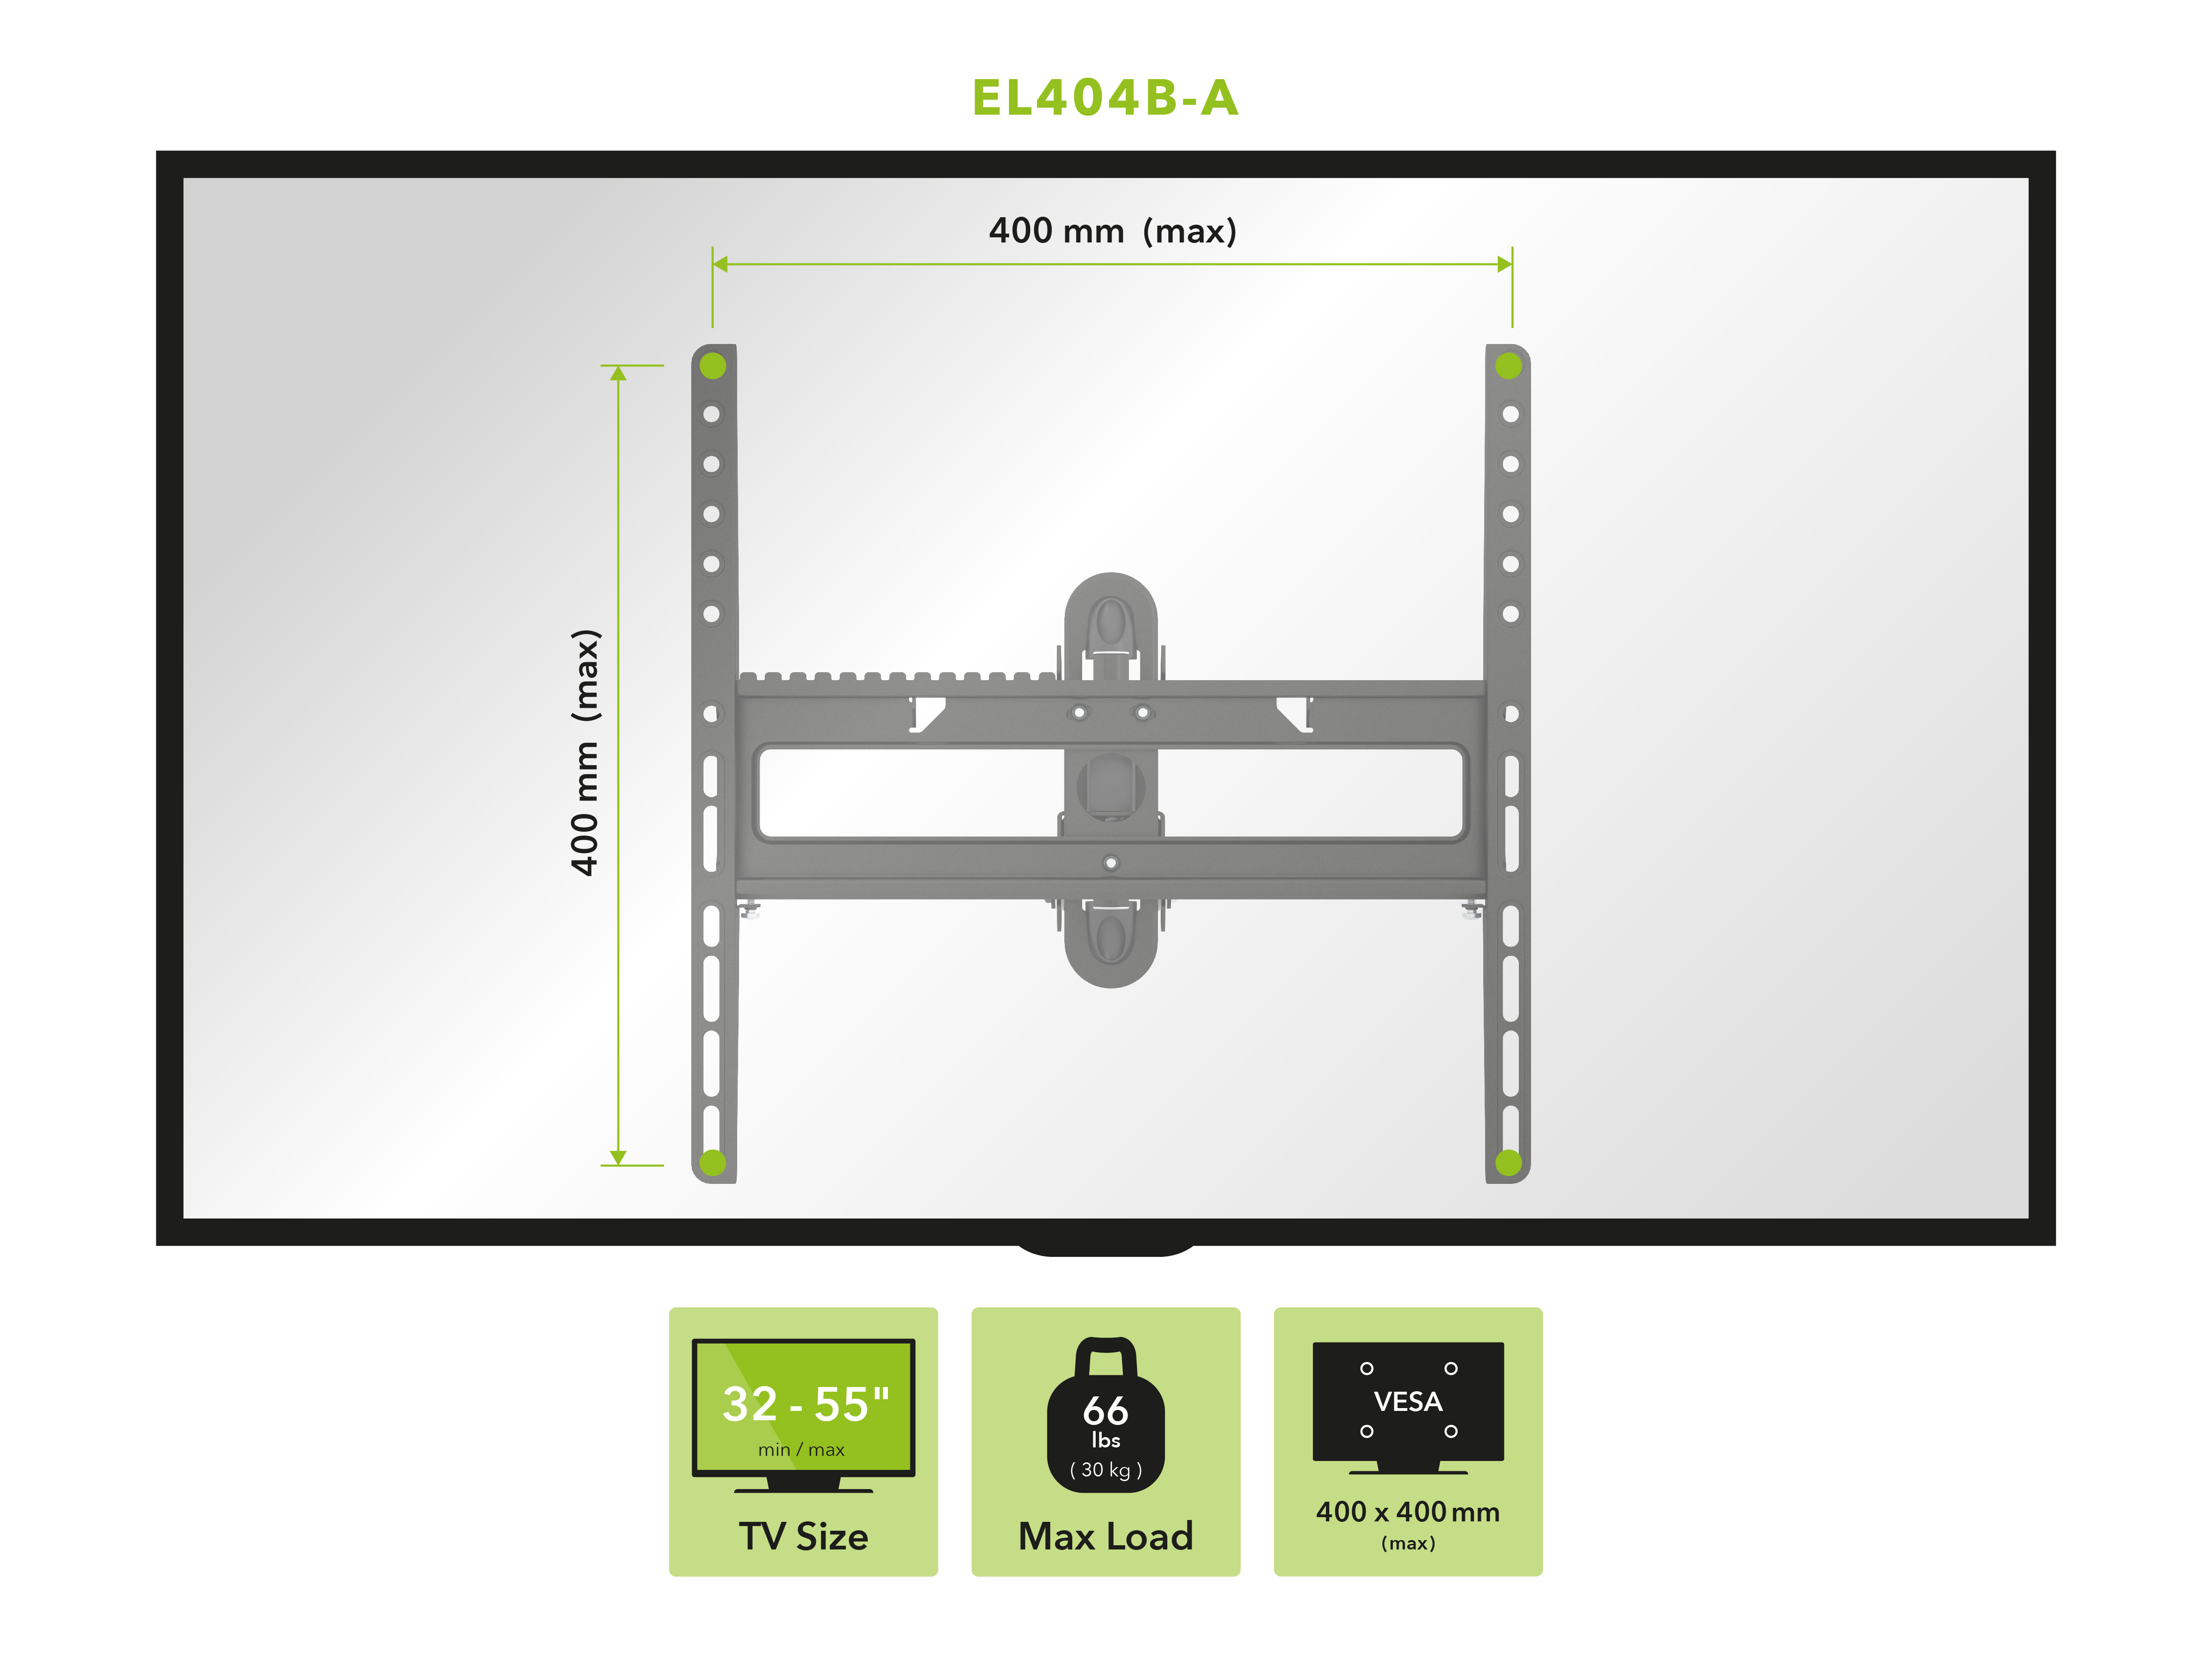 EL404B-A Multi Position Full Motion Long Extension TV Wall Mount for 25-inch to 55-inch TVs. - image 3 of 8